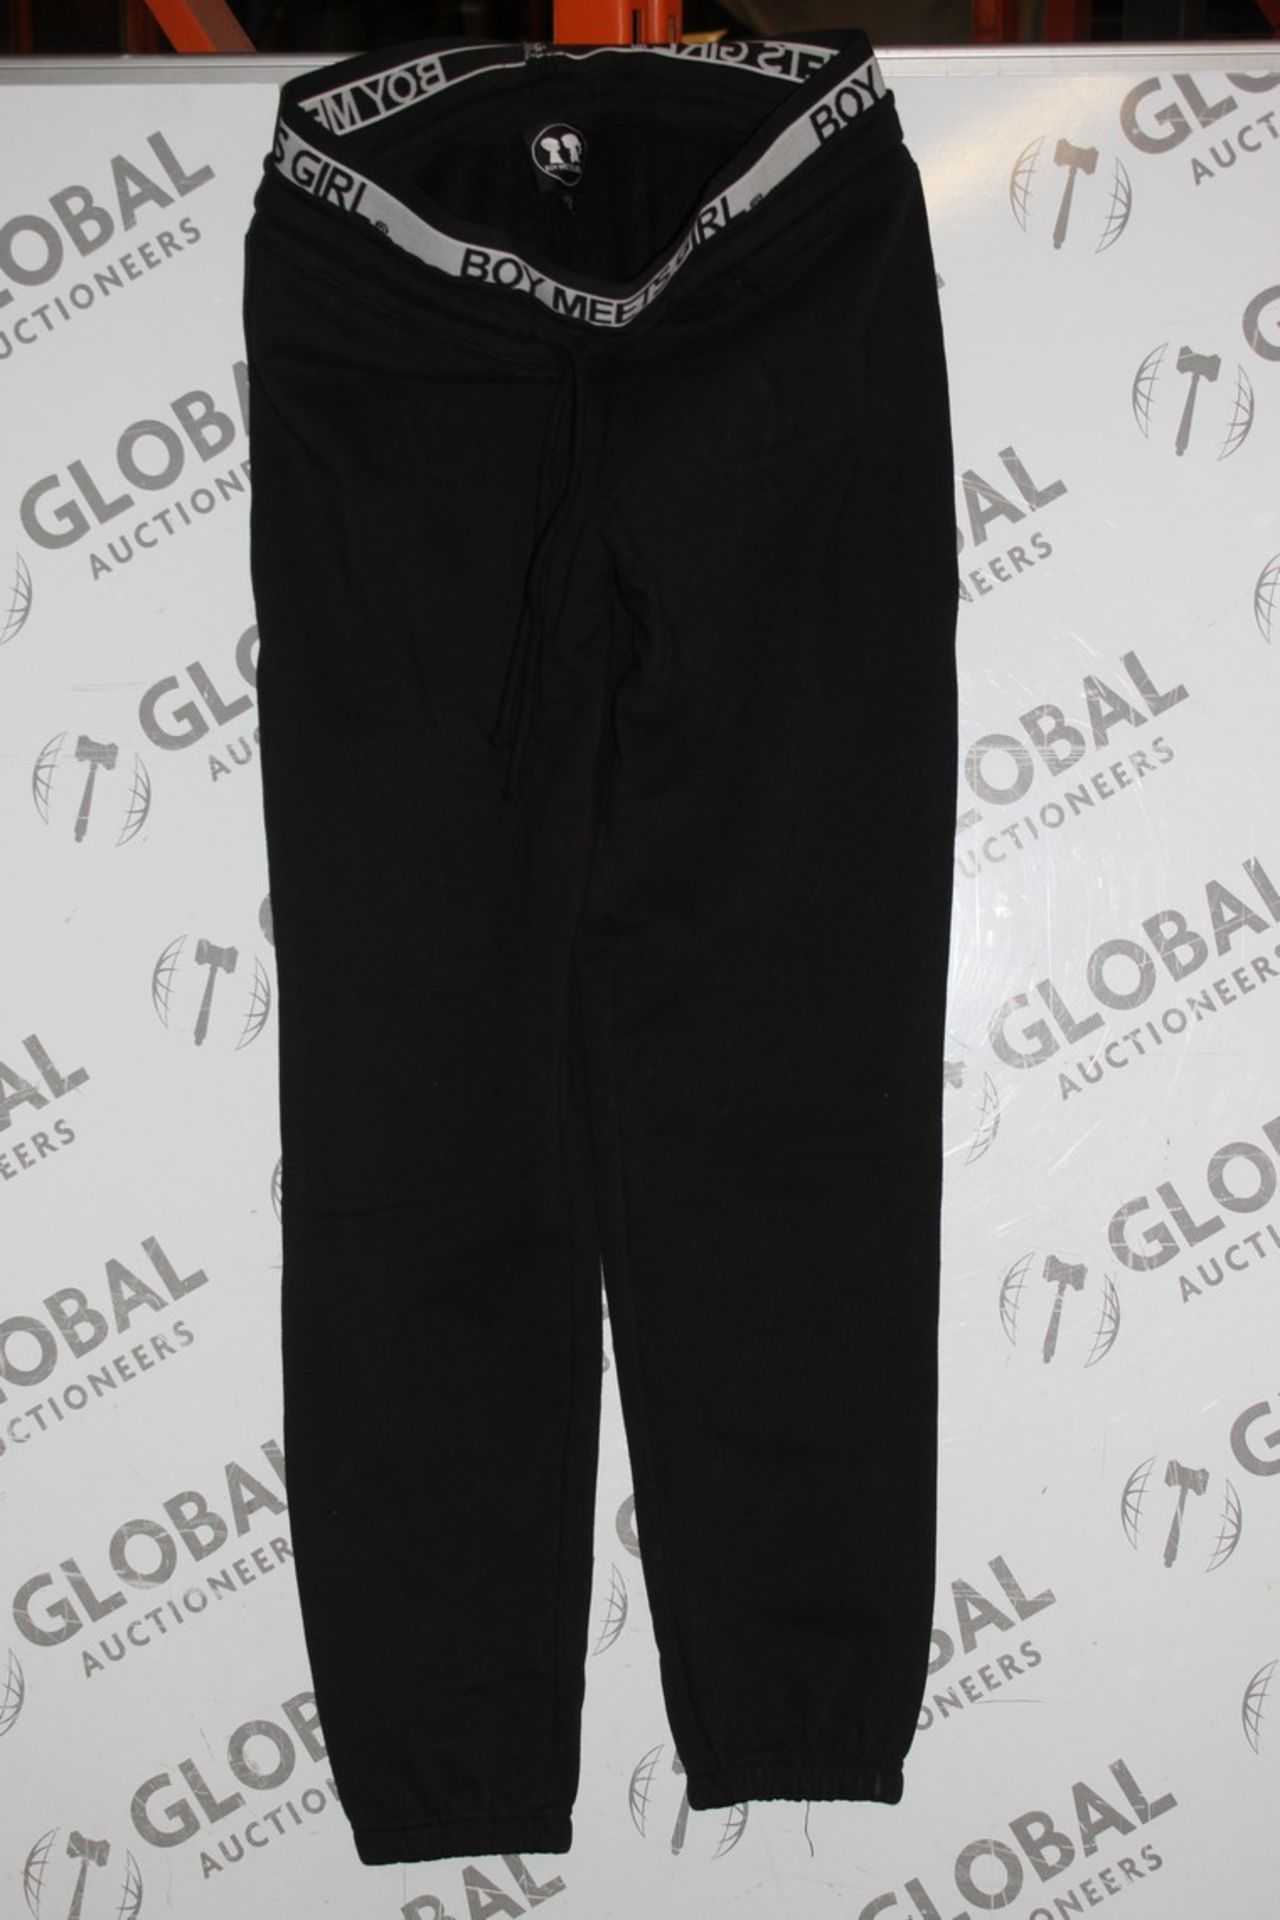 Lot to Contain 20 Brand New Assorted Pairs of Boy Meets Girl High Waist and Black Lounging Pants